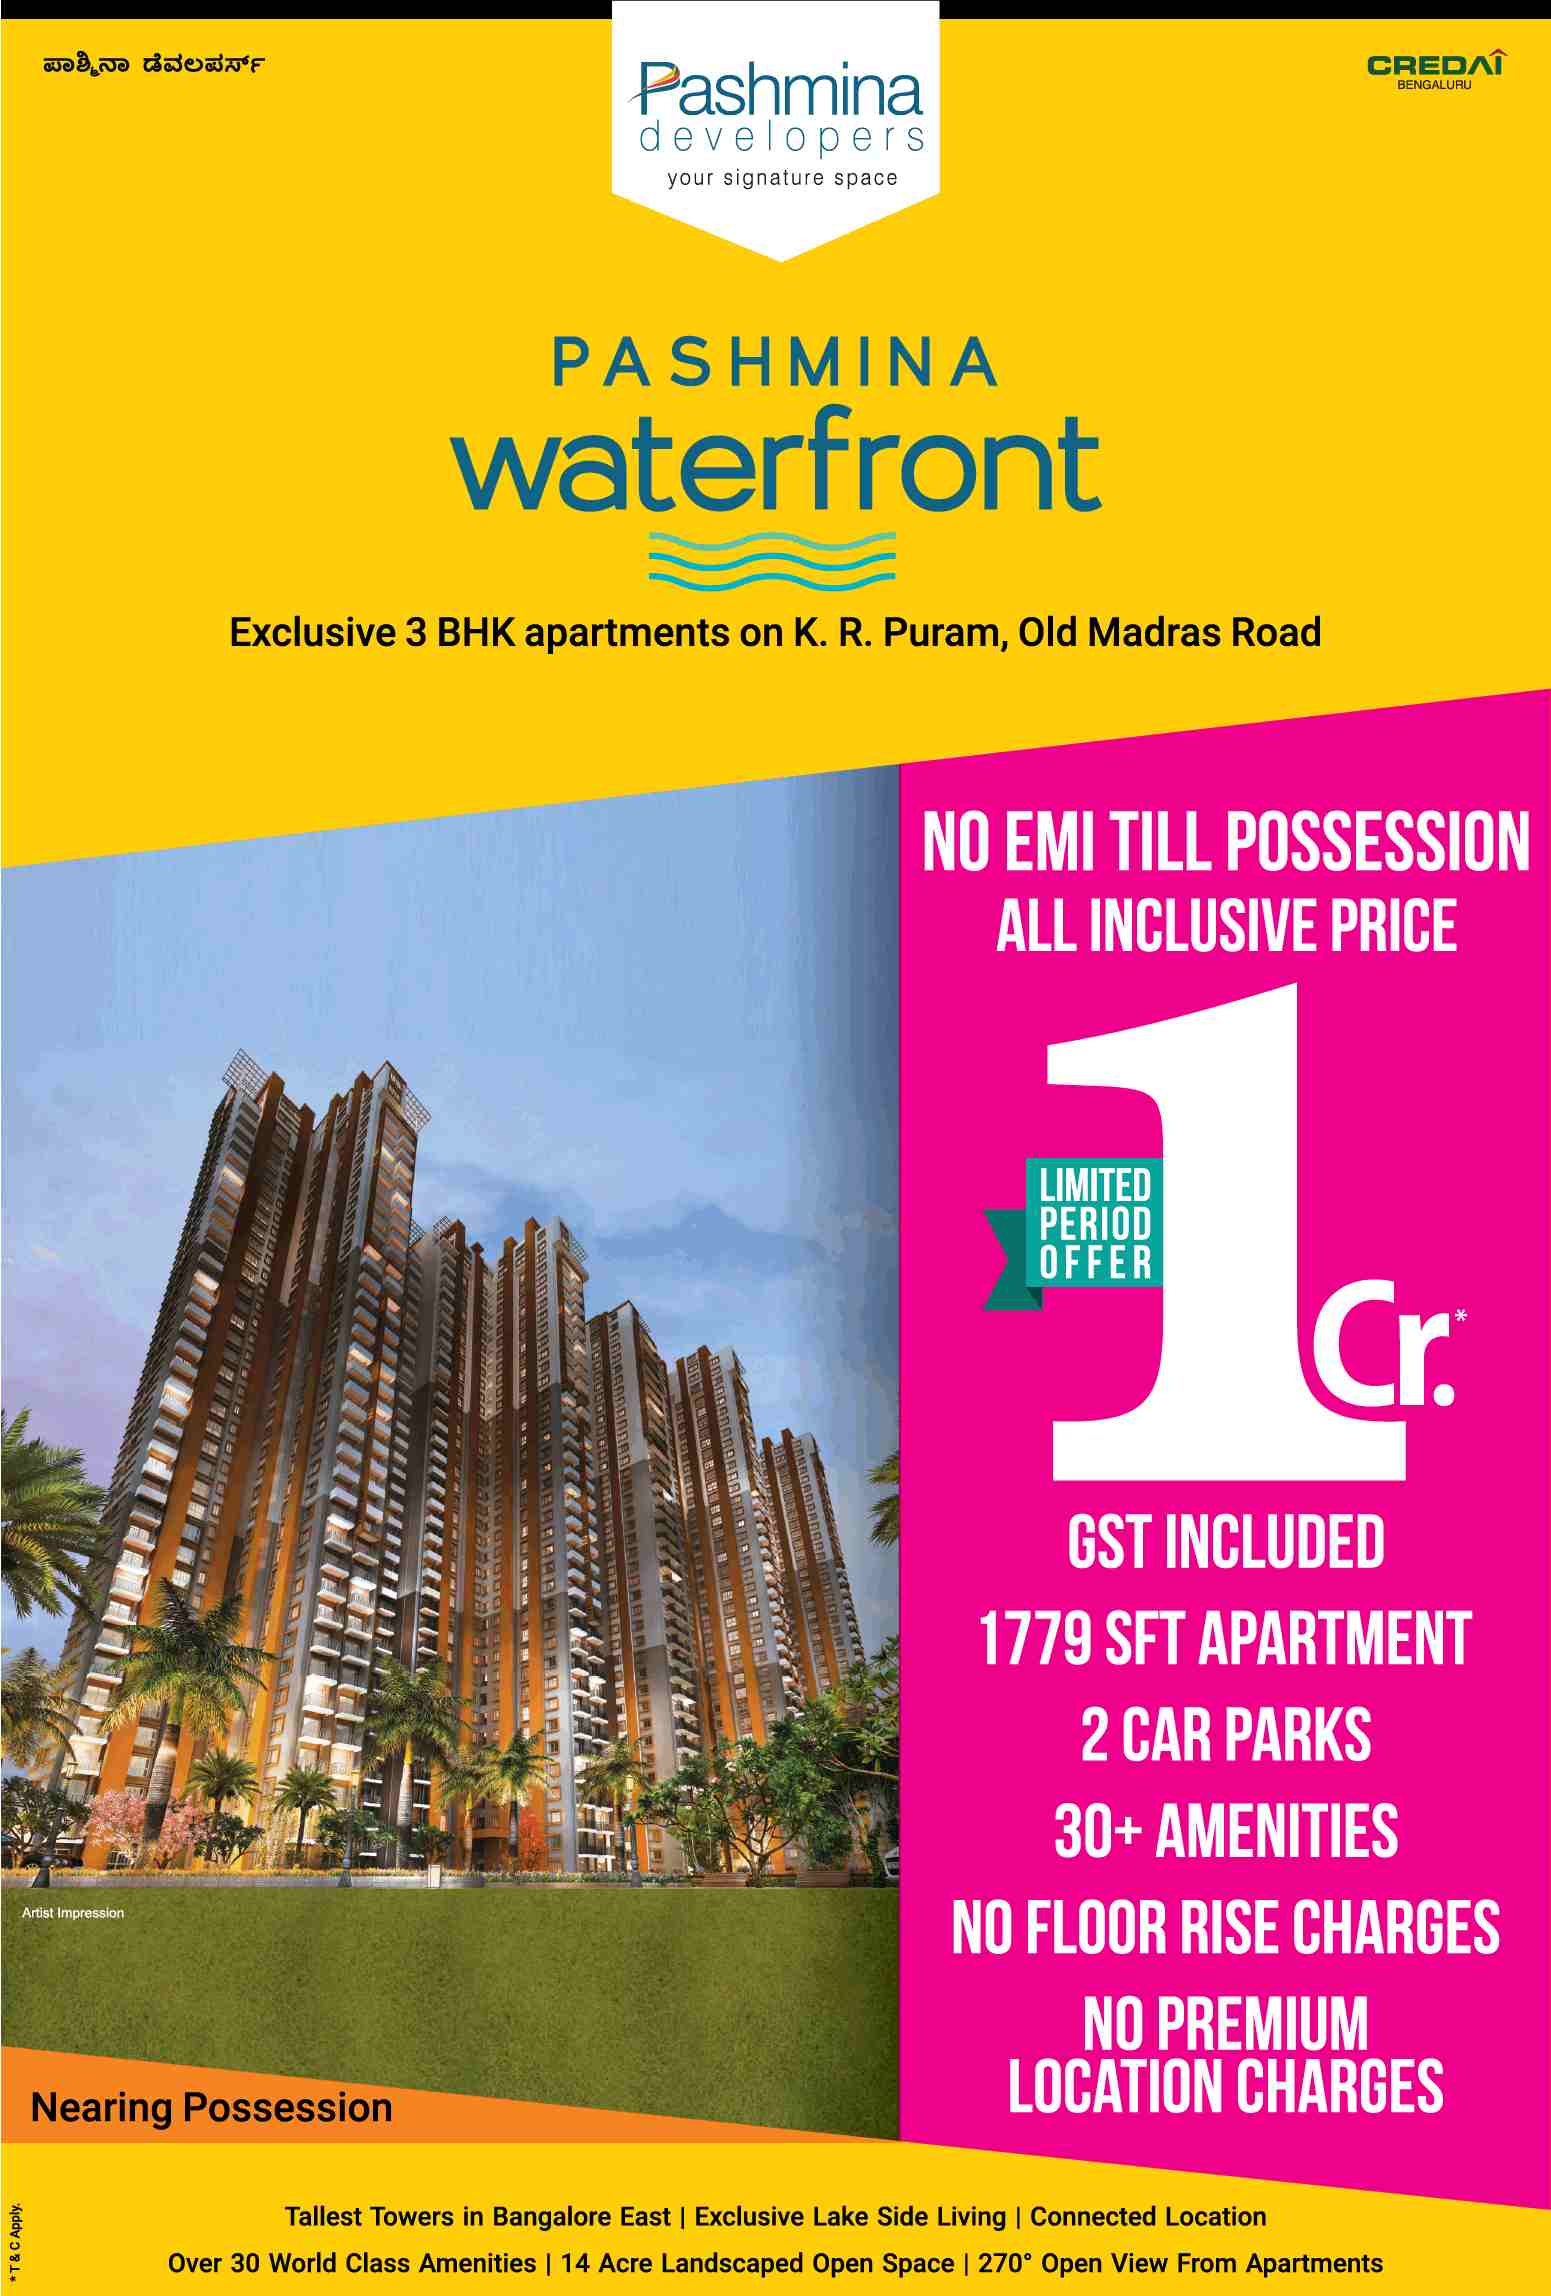 Book home & pay no EMI till possession at Pashmina Waterfront in Bangalore Update